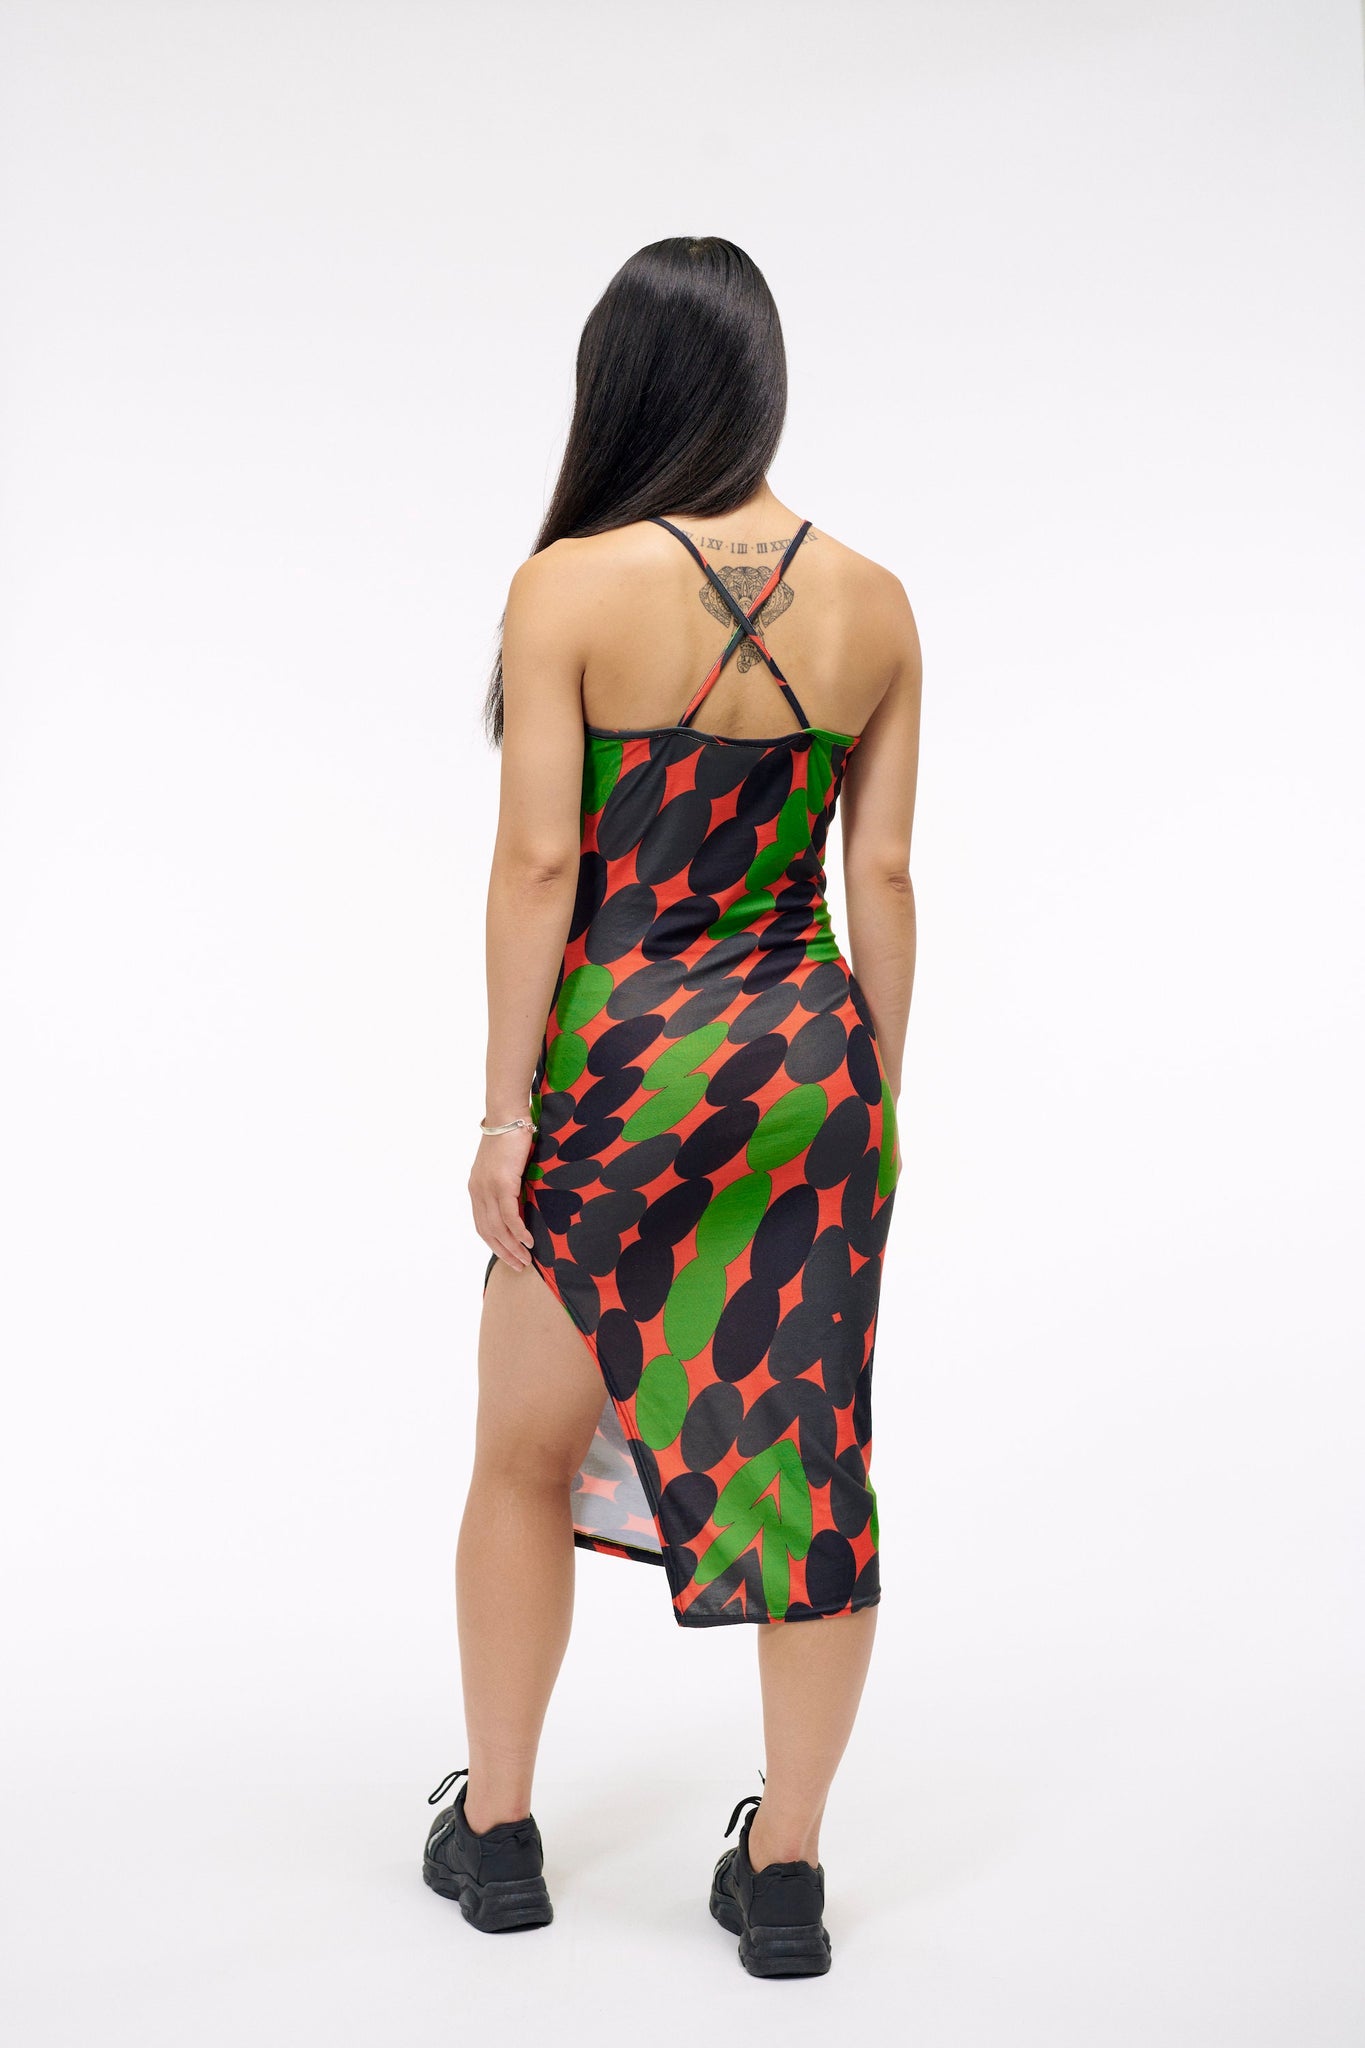 The Wicked Torque Dress | A Twisted Piece for the Fabulously Extra | Spaghetti Strap in Jersey with Black Red and Green Print | Goose Taffy